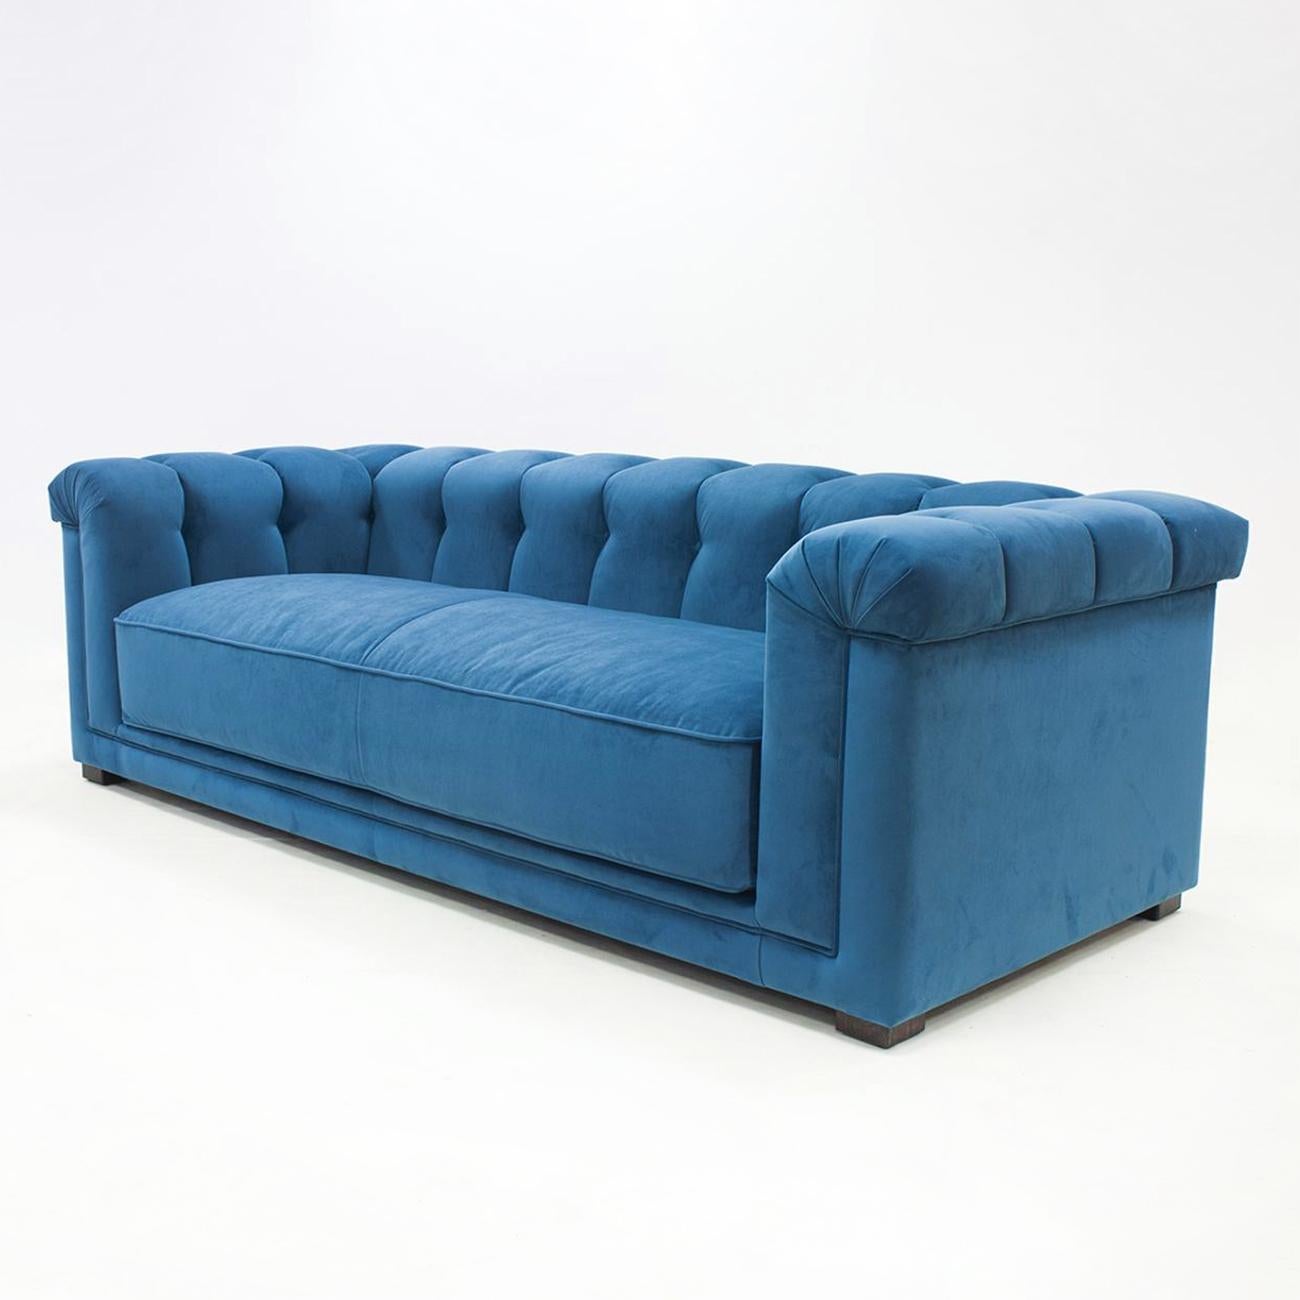 Sofa Lander with solid wood structure, upholstered
and covered with high quality blue velvet fabric Cat 1.
Available in:
L 250 x D 95 x H 70cm, price: 7900,00€.
L 225 x D 95 x H 70cm, price: 7200,00€.
L 200 x D 95 x H 70cm, price: 6900,00€.
L